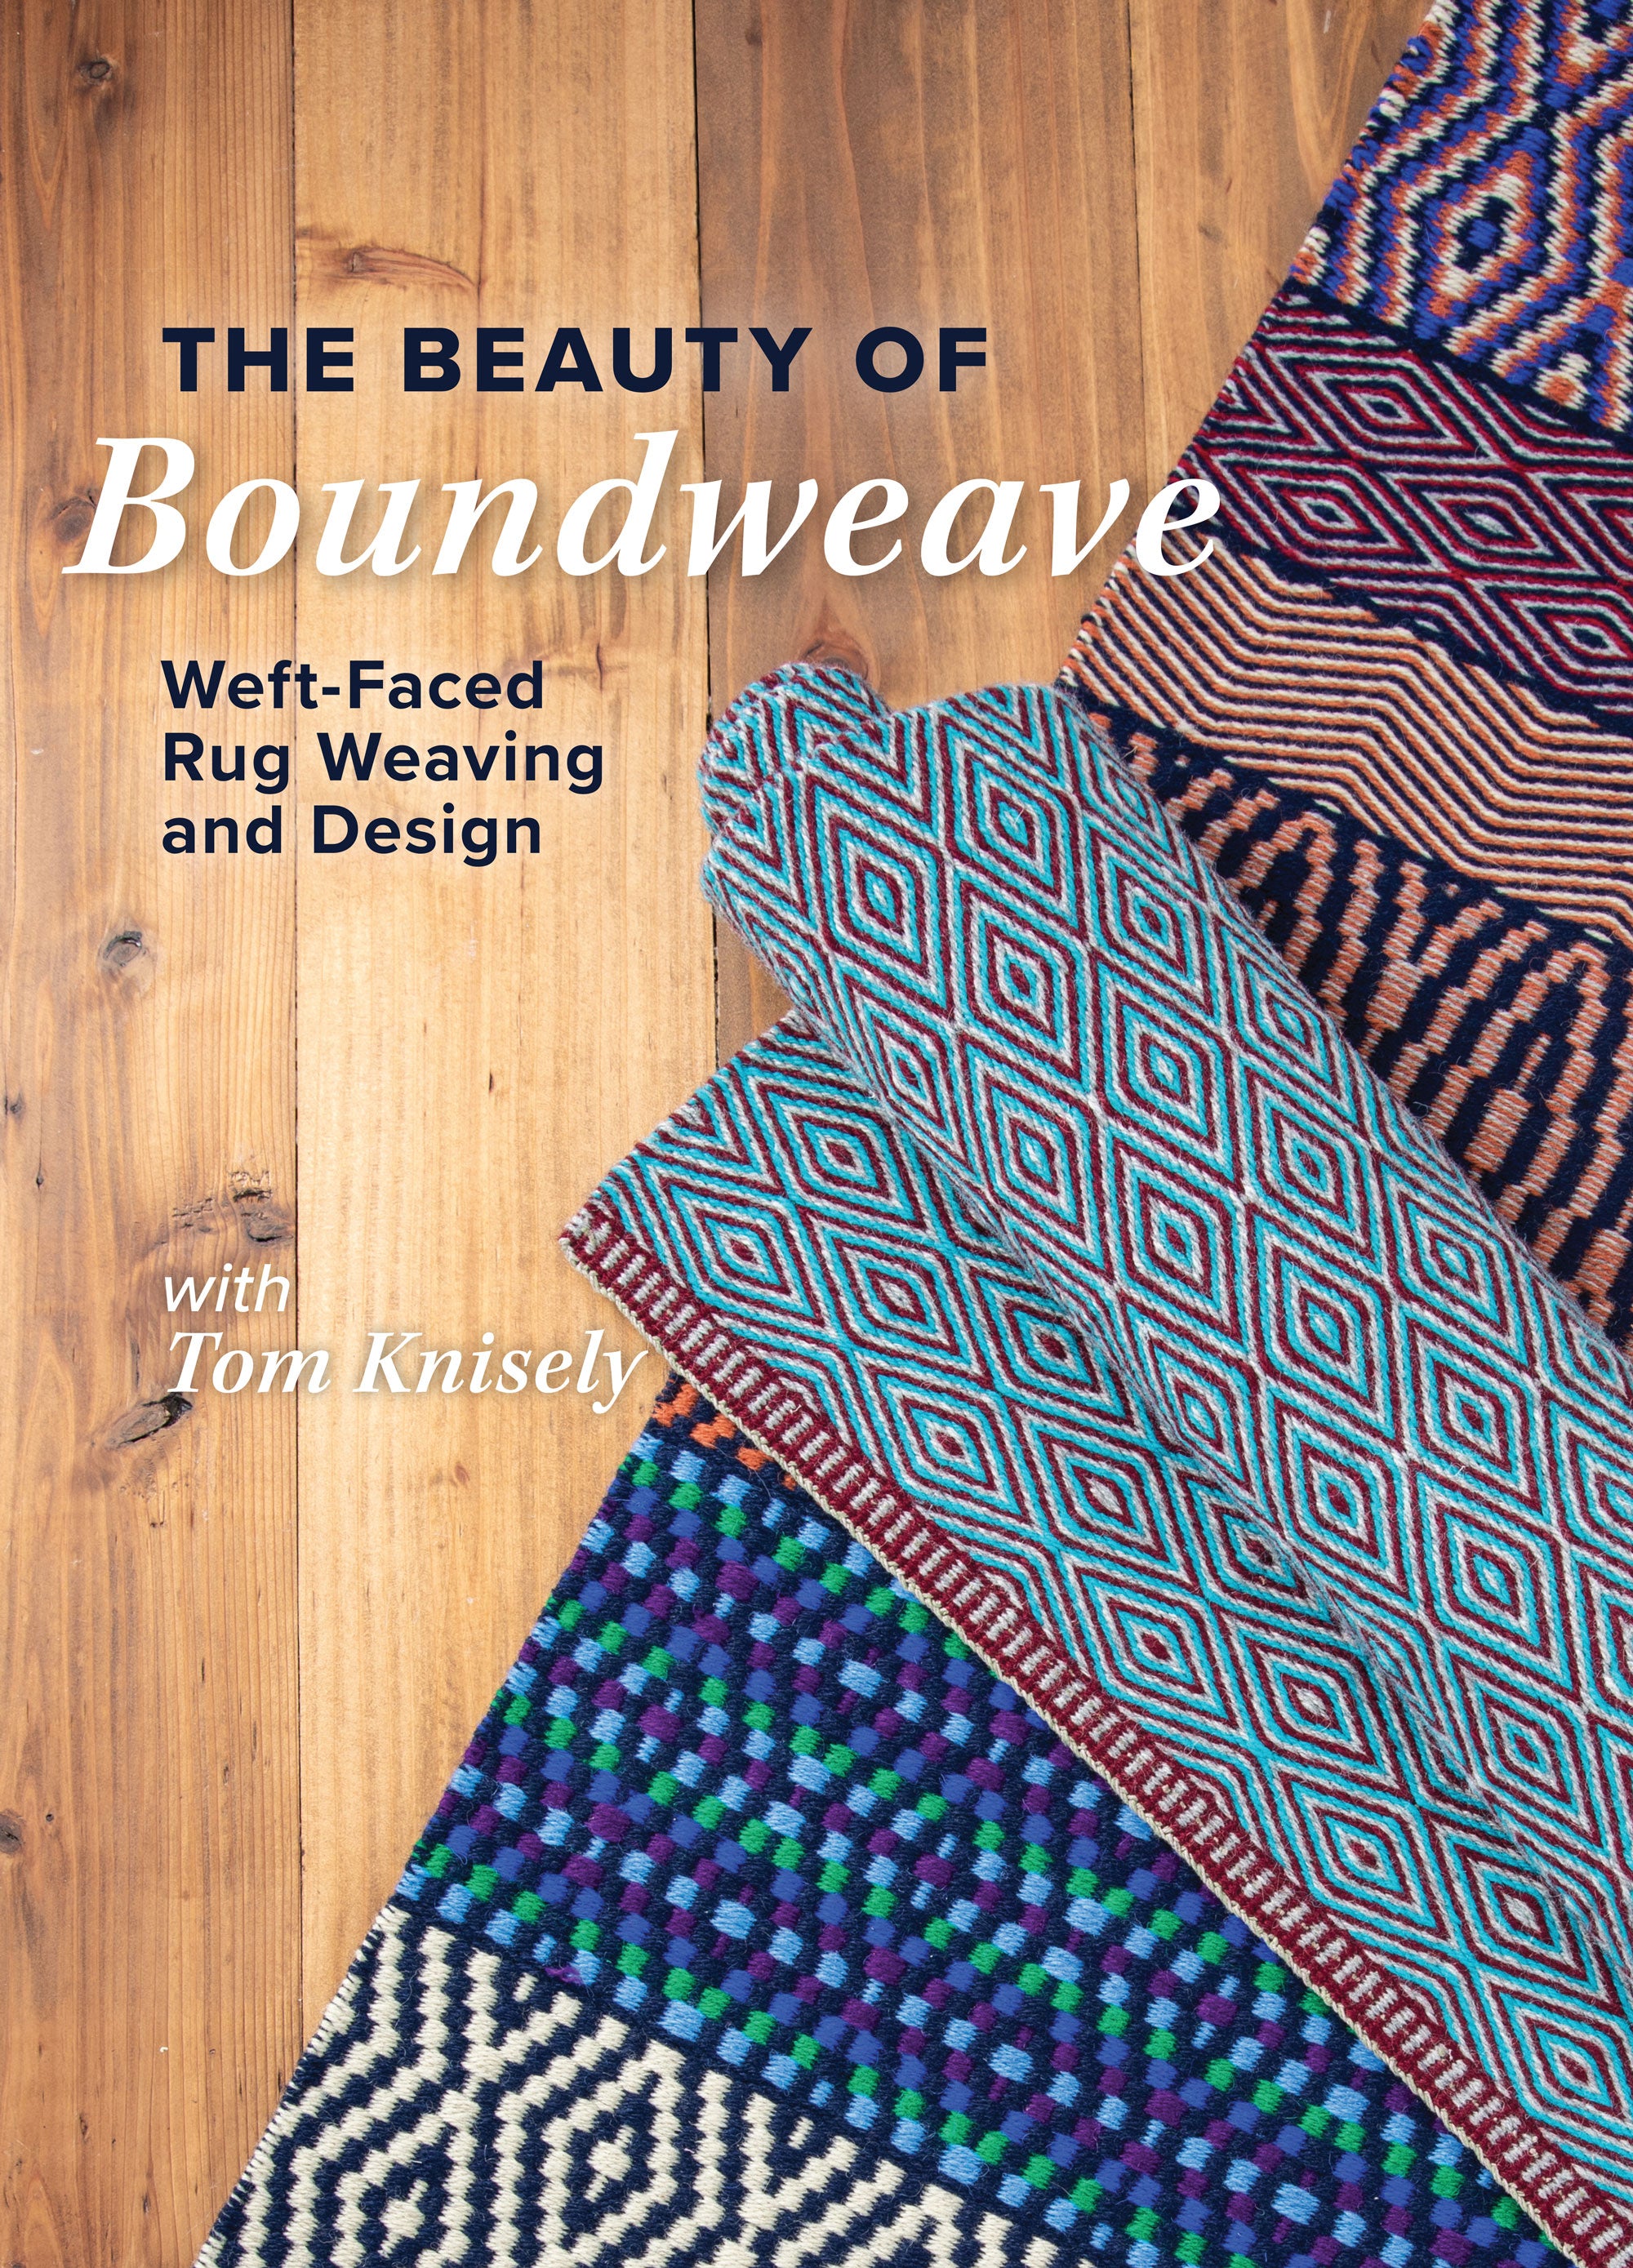 The Beauty of Boundweave with Tom Knisely Video Download – Long 